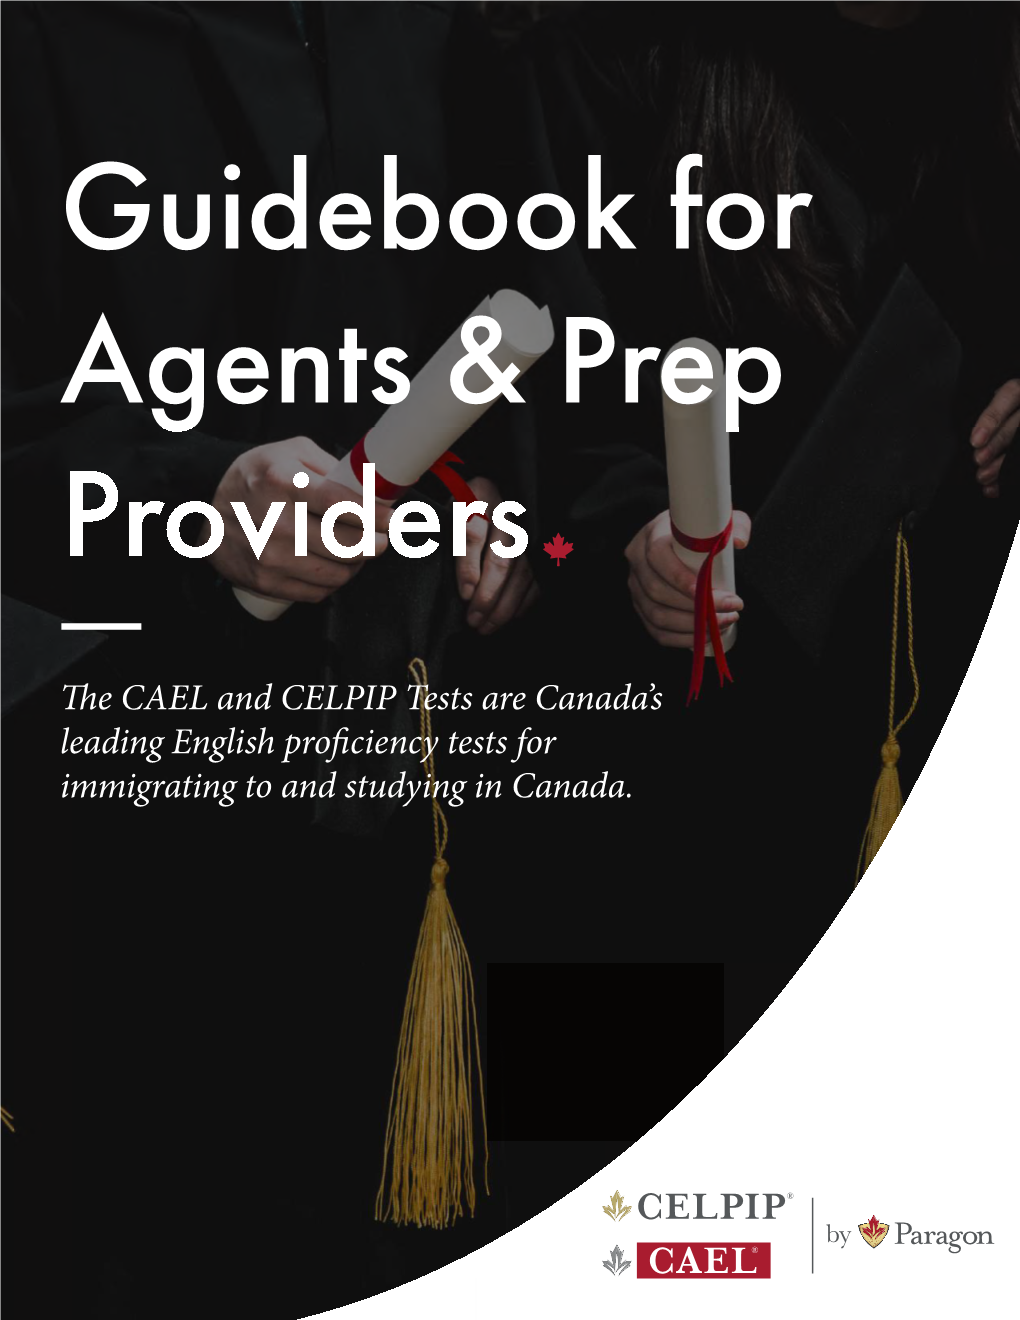 Guidebook-Agents and Prep Providers-2021.Indd